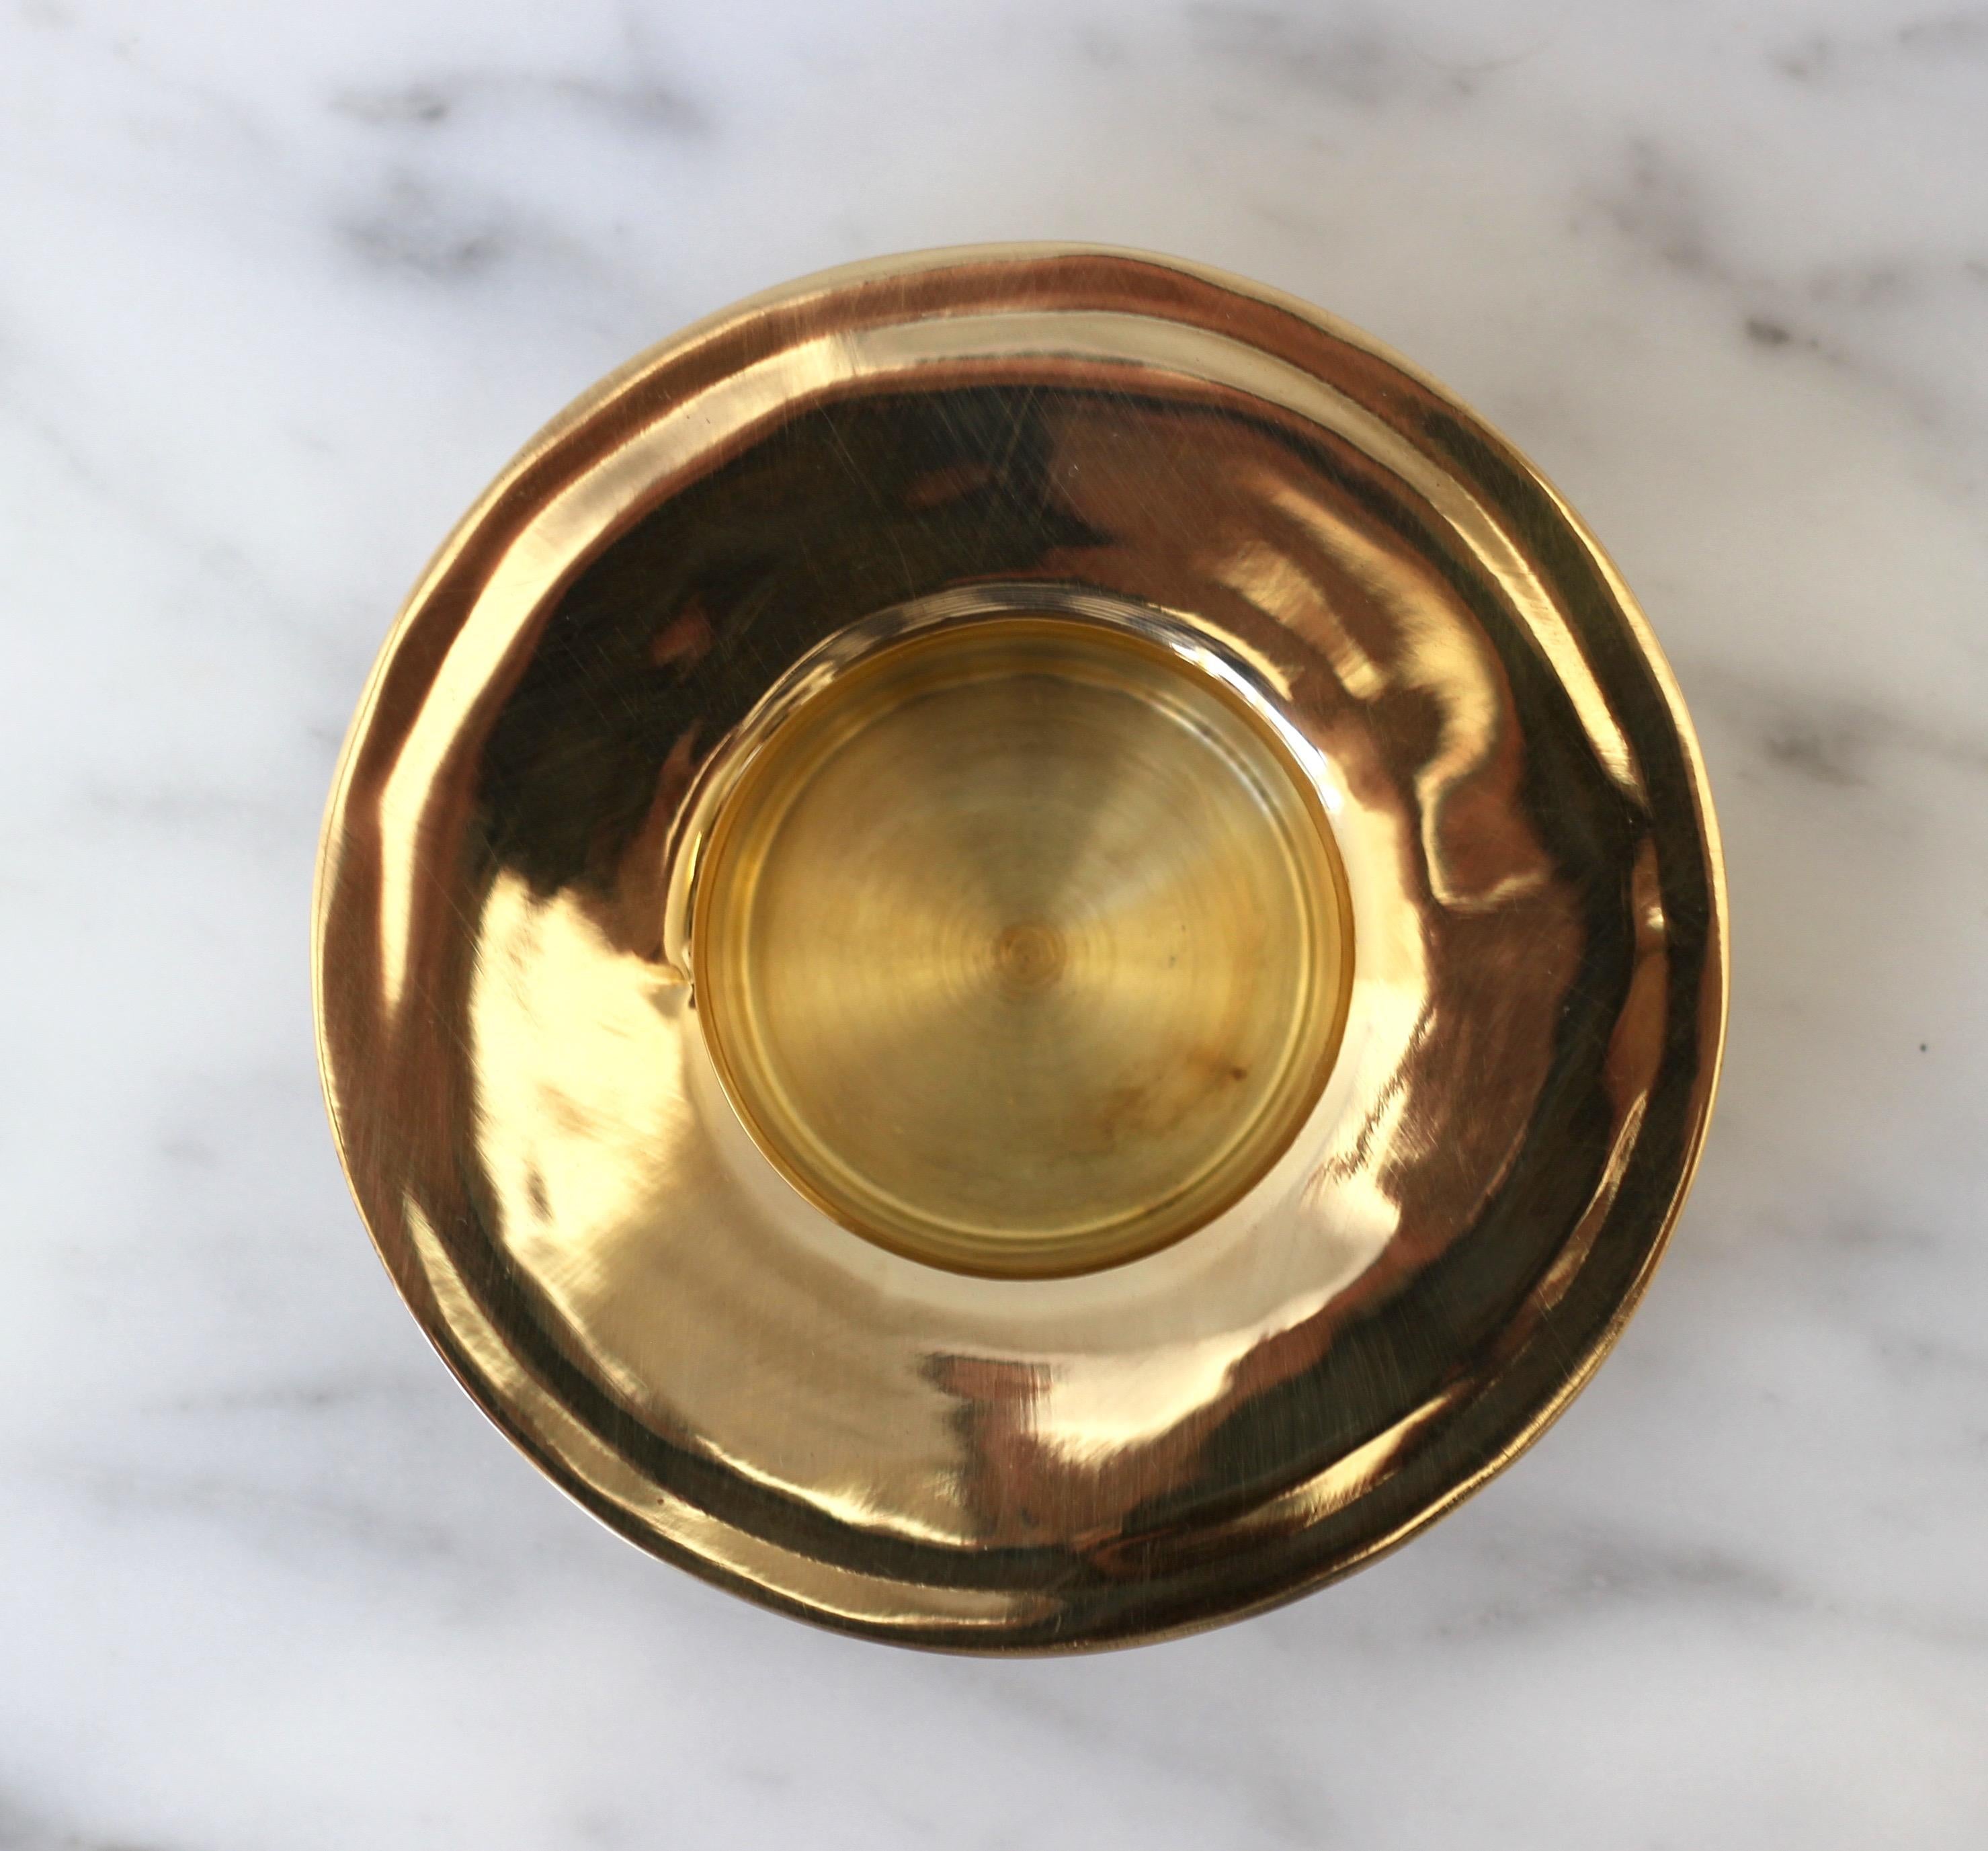 This very charming brass tea light holder is the perfect accessory for modern or more vintage themed interiors. It is very Minimalist, elegant and can be used in any setting. A perfect gift for any occasion.

Dia. 9.5 cm (3.7